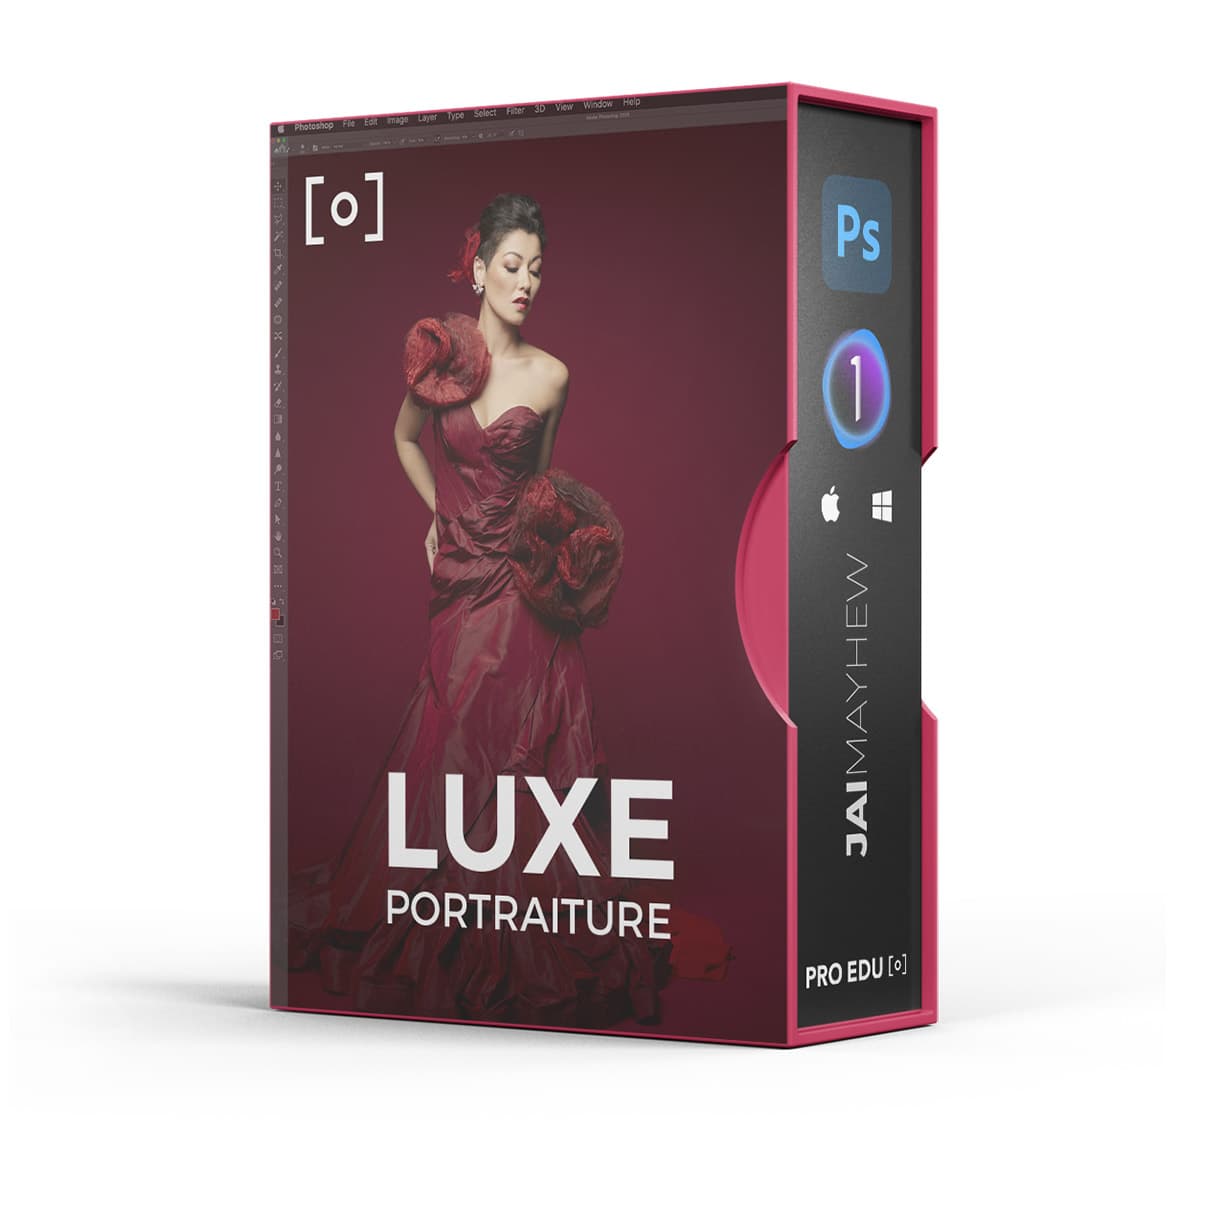 Luxe portraiture box from PRO EDU